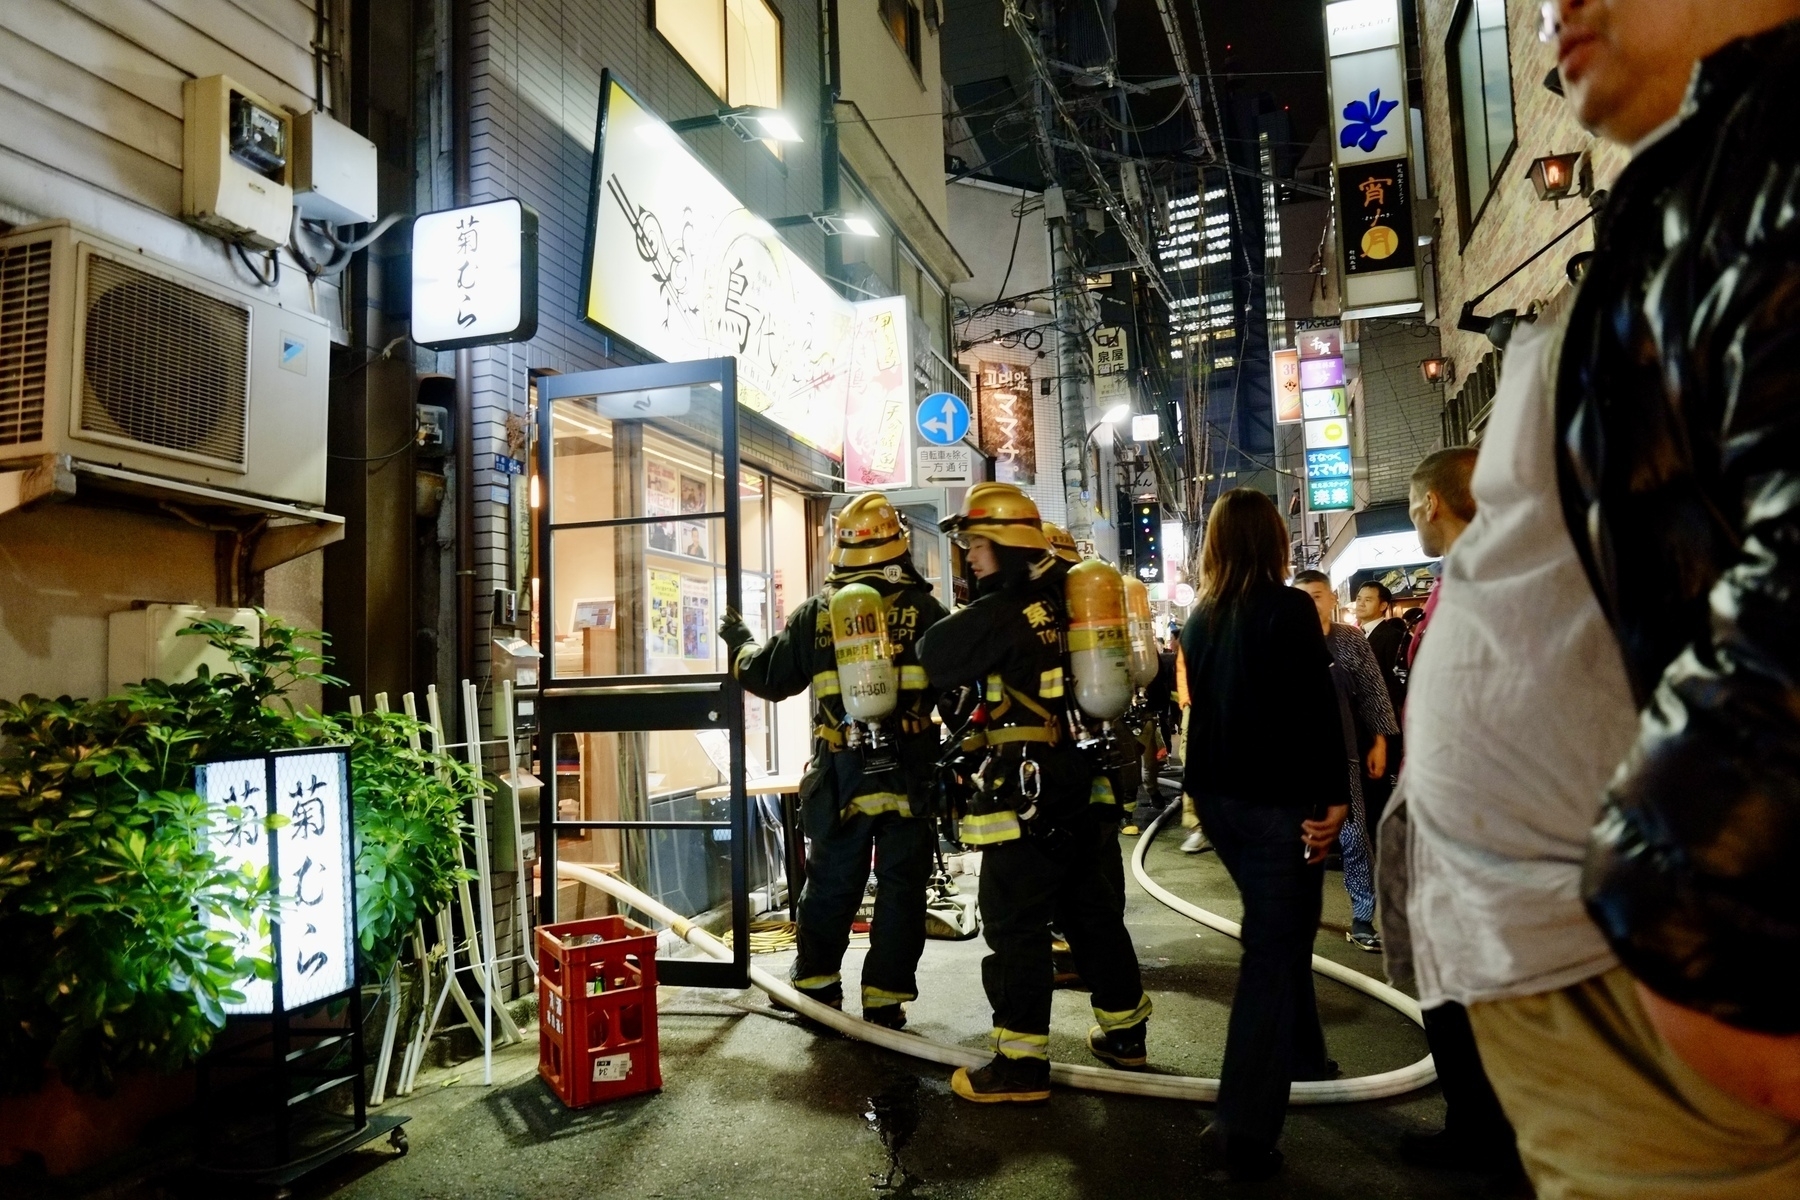 Fire fighters entering a blaze site in the narrow back street area of Shimbashi Tokyo, Japan. 